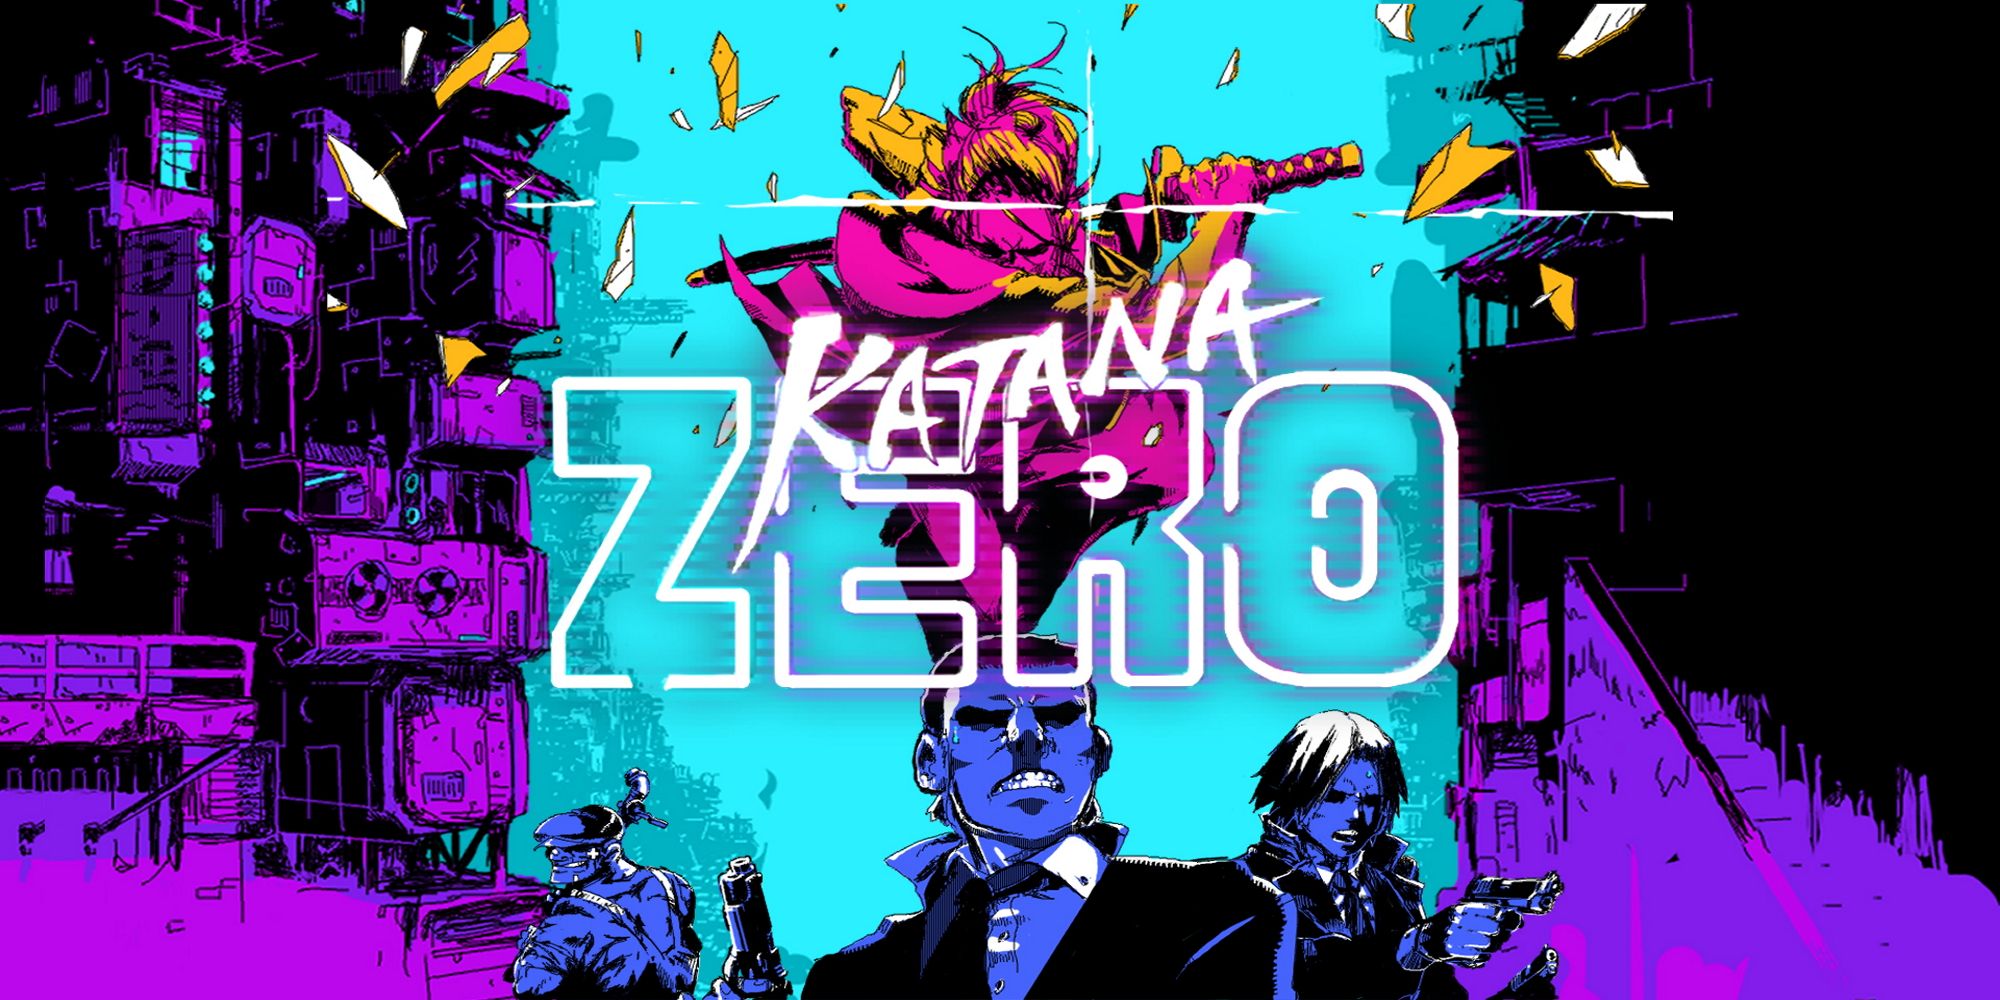 Katana Zero - The Assassin Leaping Through The Air To Attack A Group Of Bad Guys